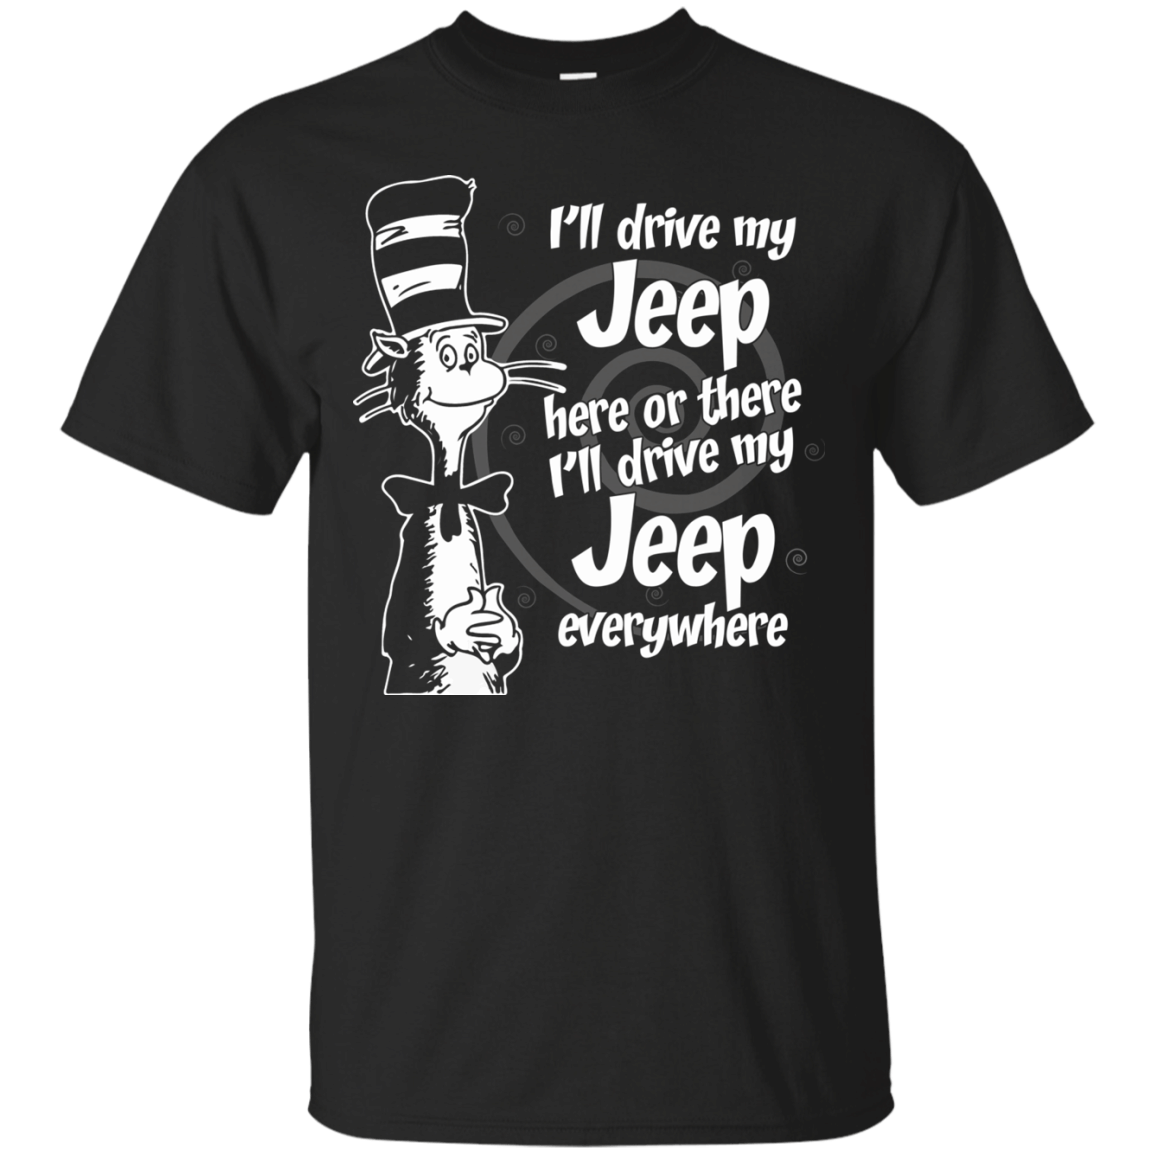 Ill drive my jeep here or there ill drive my jeep everywhere unisex shirt